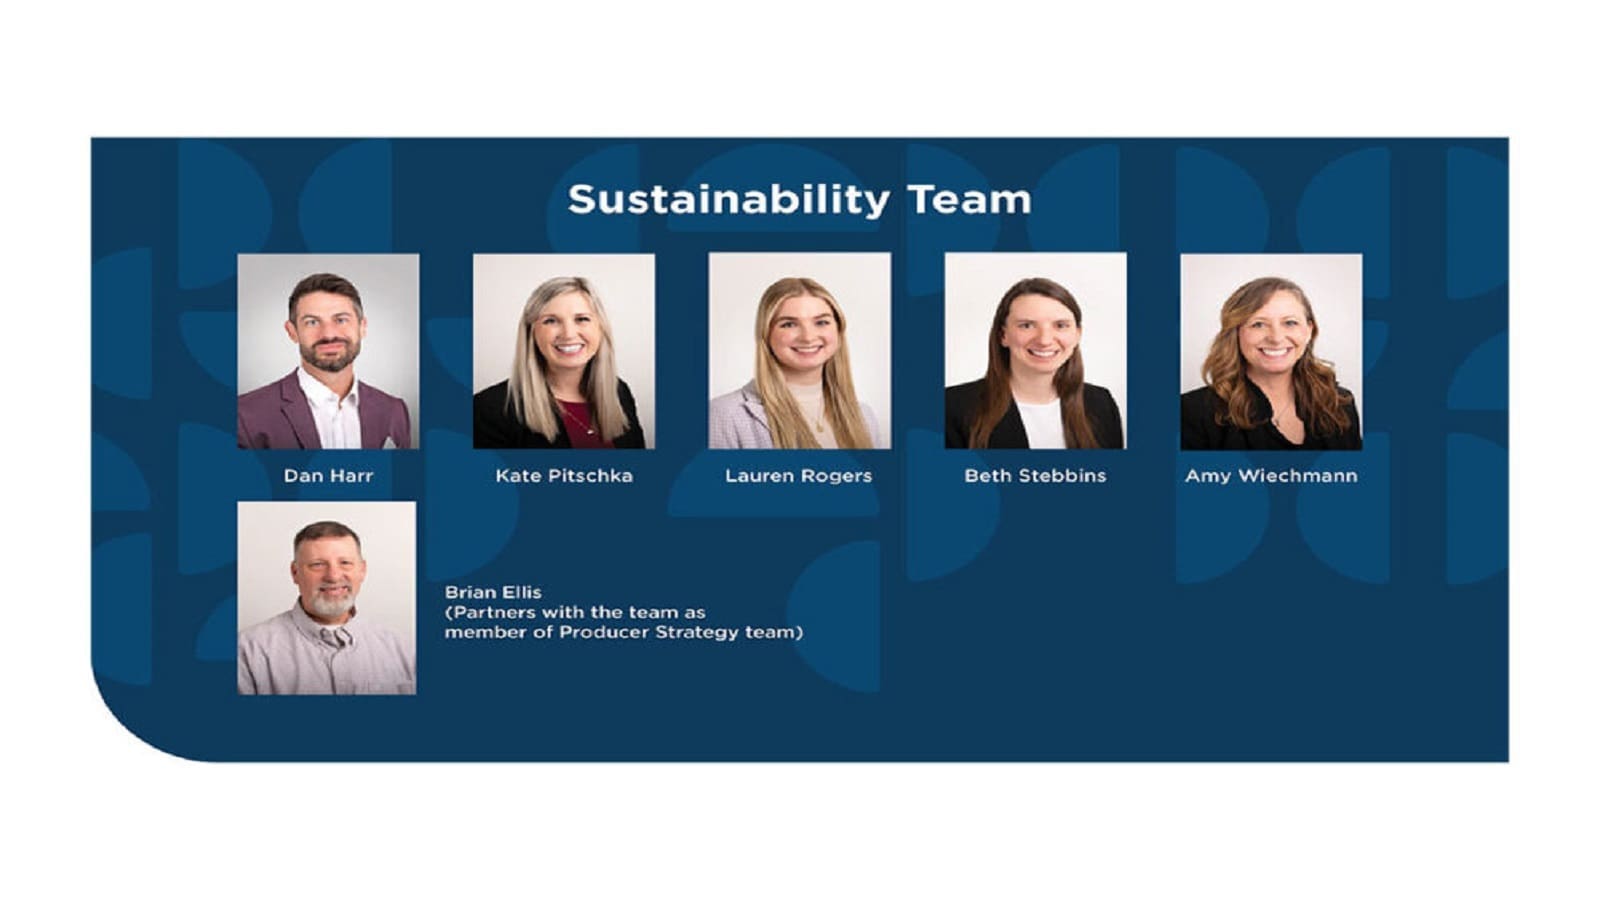 Scoular new sustainability team to drive company’s corporate sustainability strategy